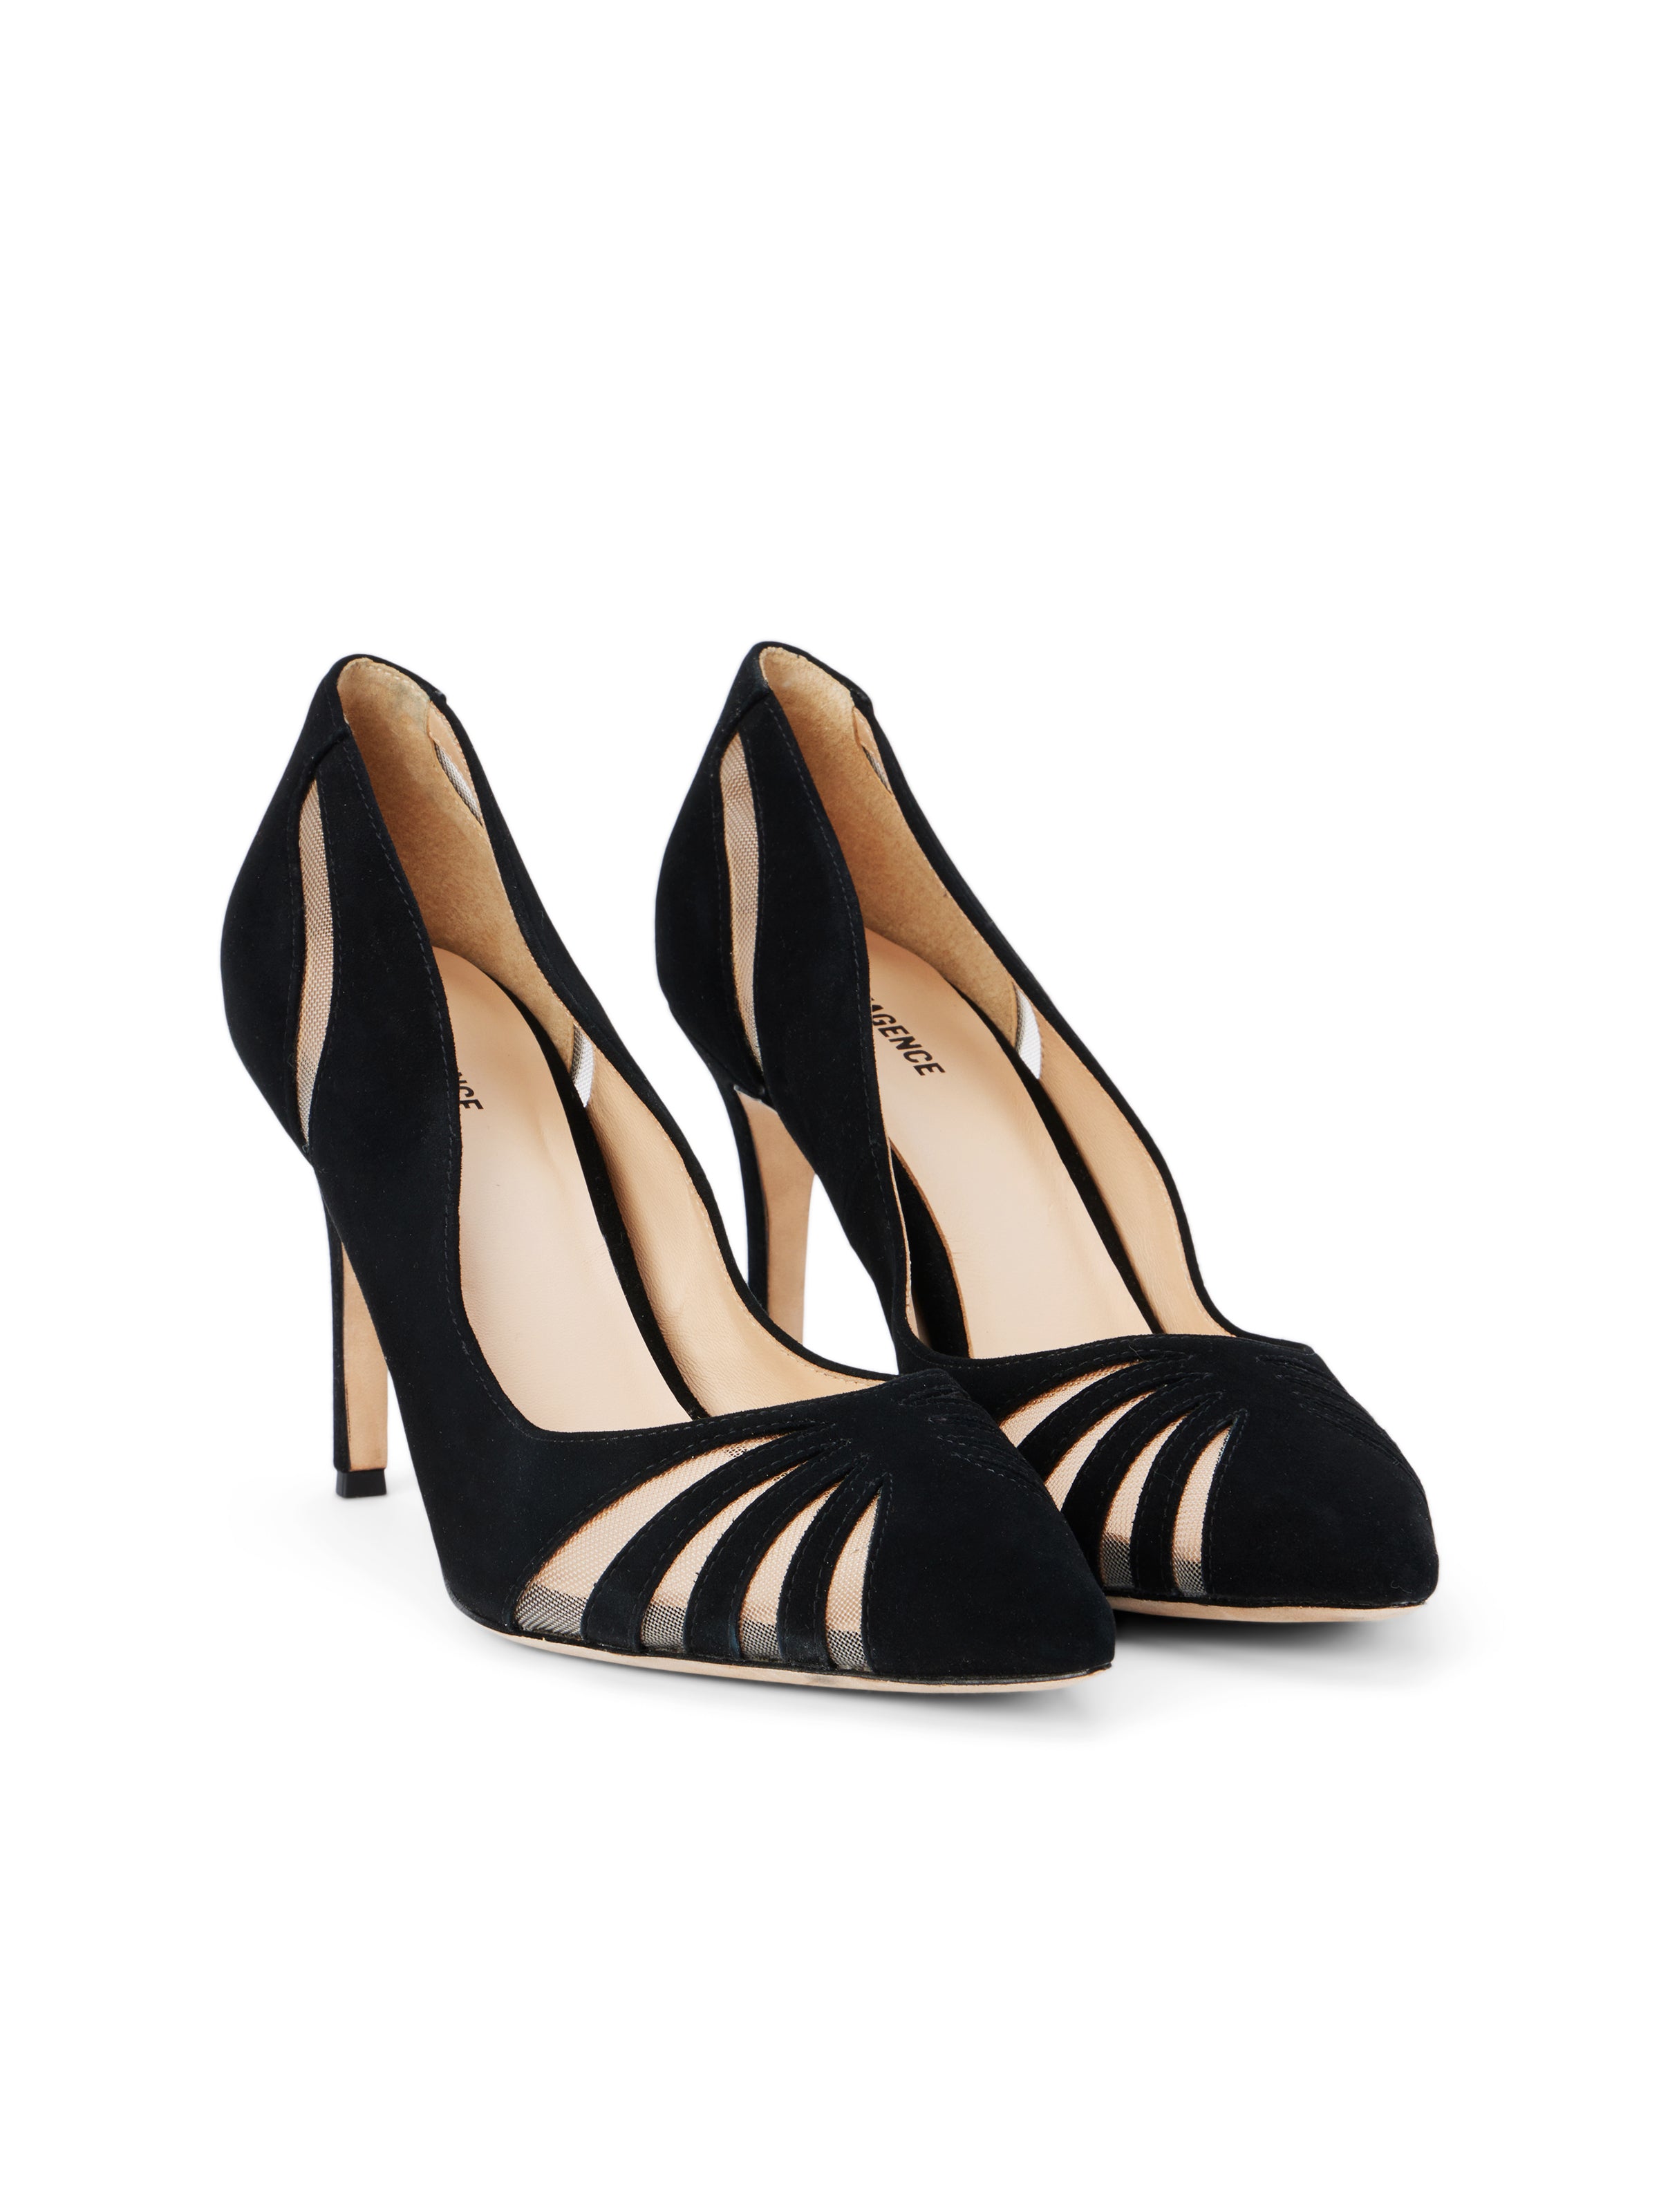 Whistles Corie High Heel Suede Court Shoes, Black at John Lewis & Partners